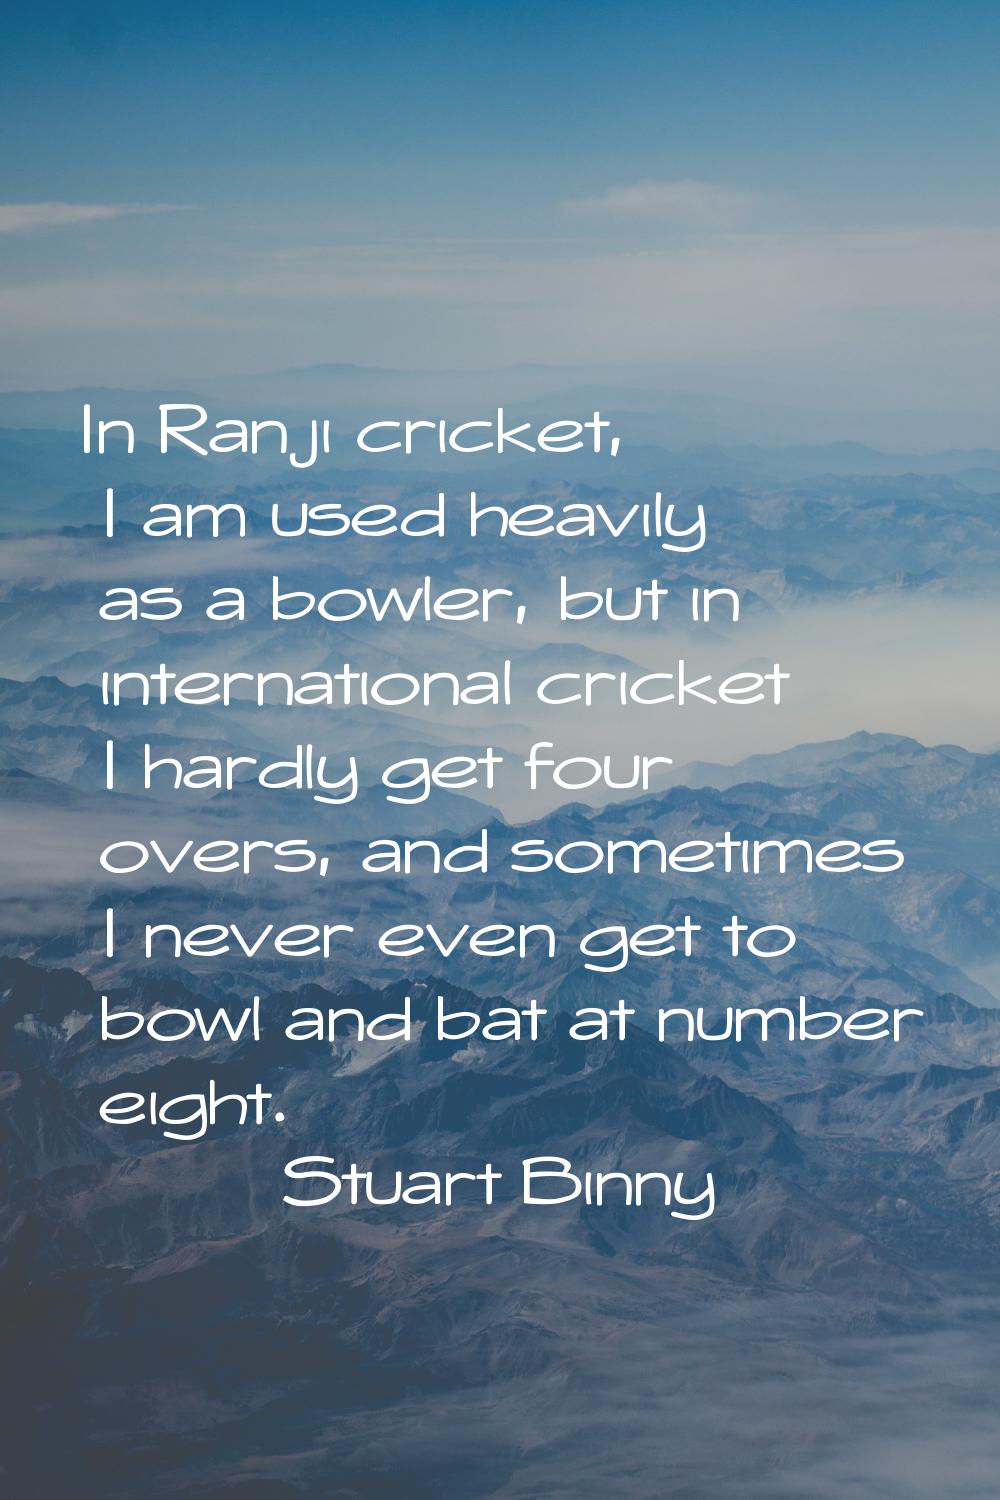 In Ranji cricket, I am used heavily as a bowler, but in international cricket I hardly get four ove